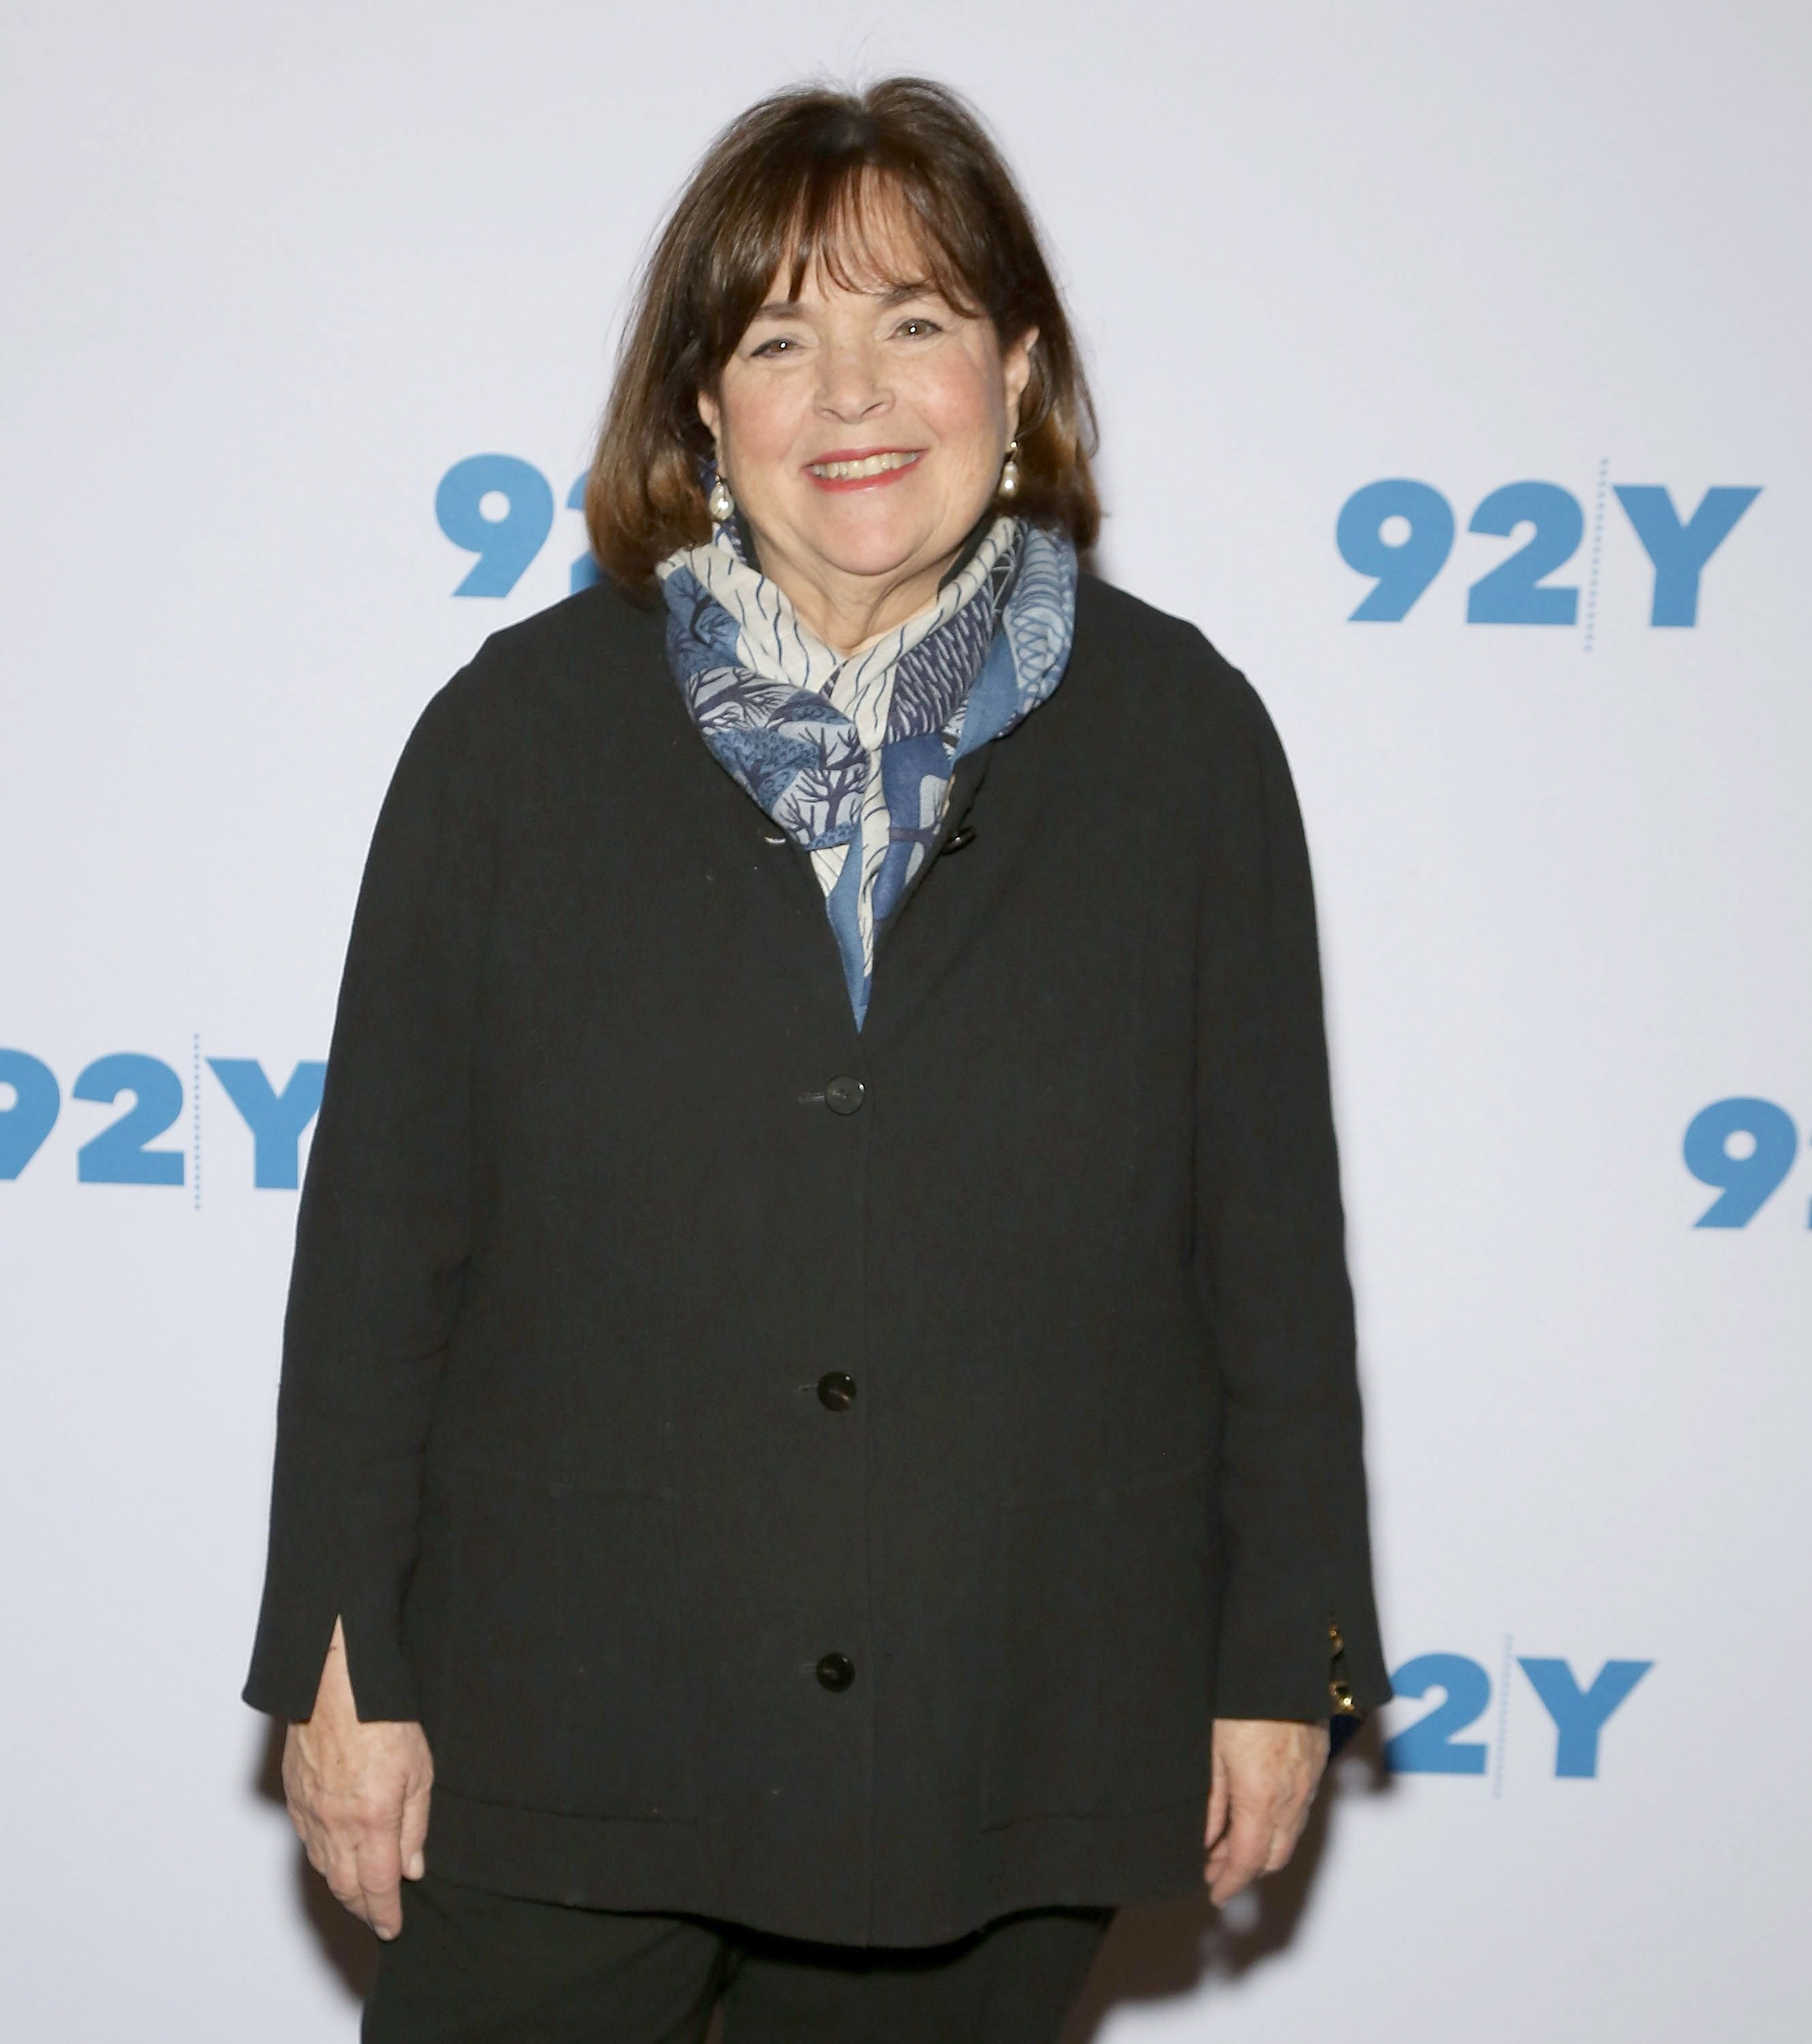 Ina Garten attends Ina Garten in Conversation with Danny Meyer at 92nd Street Y on January 31, 2017 | Photo: Getty Images